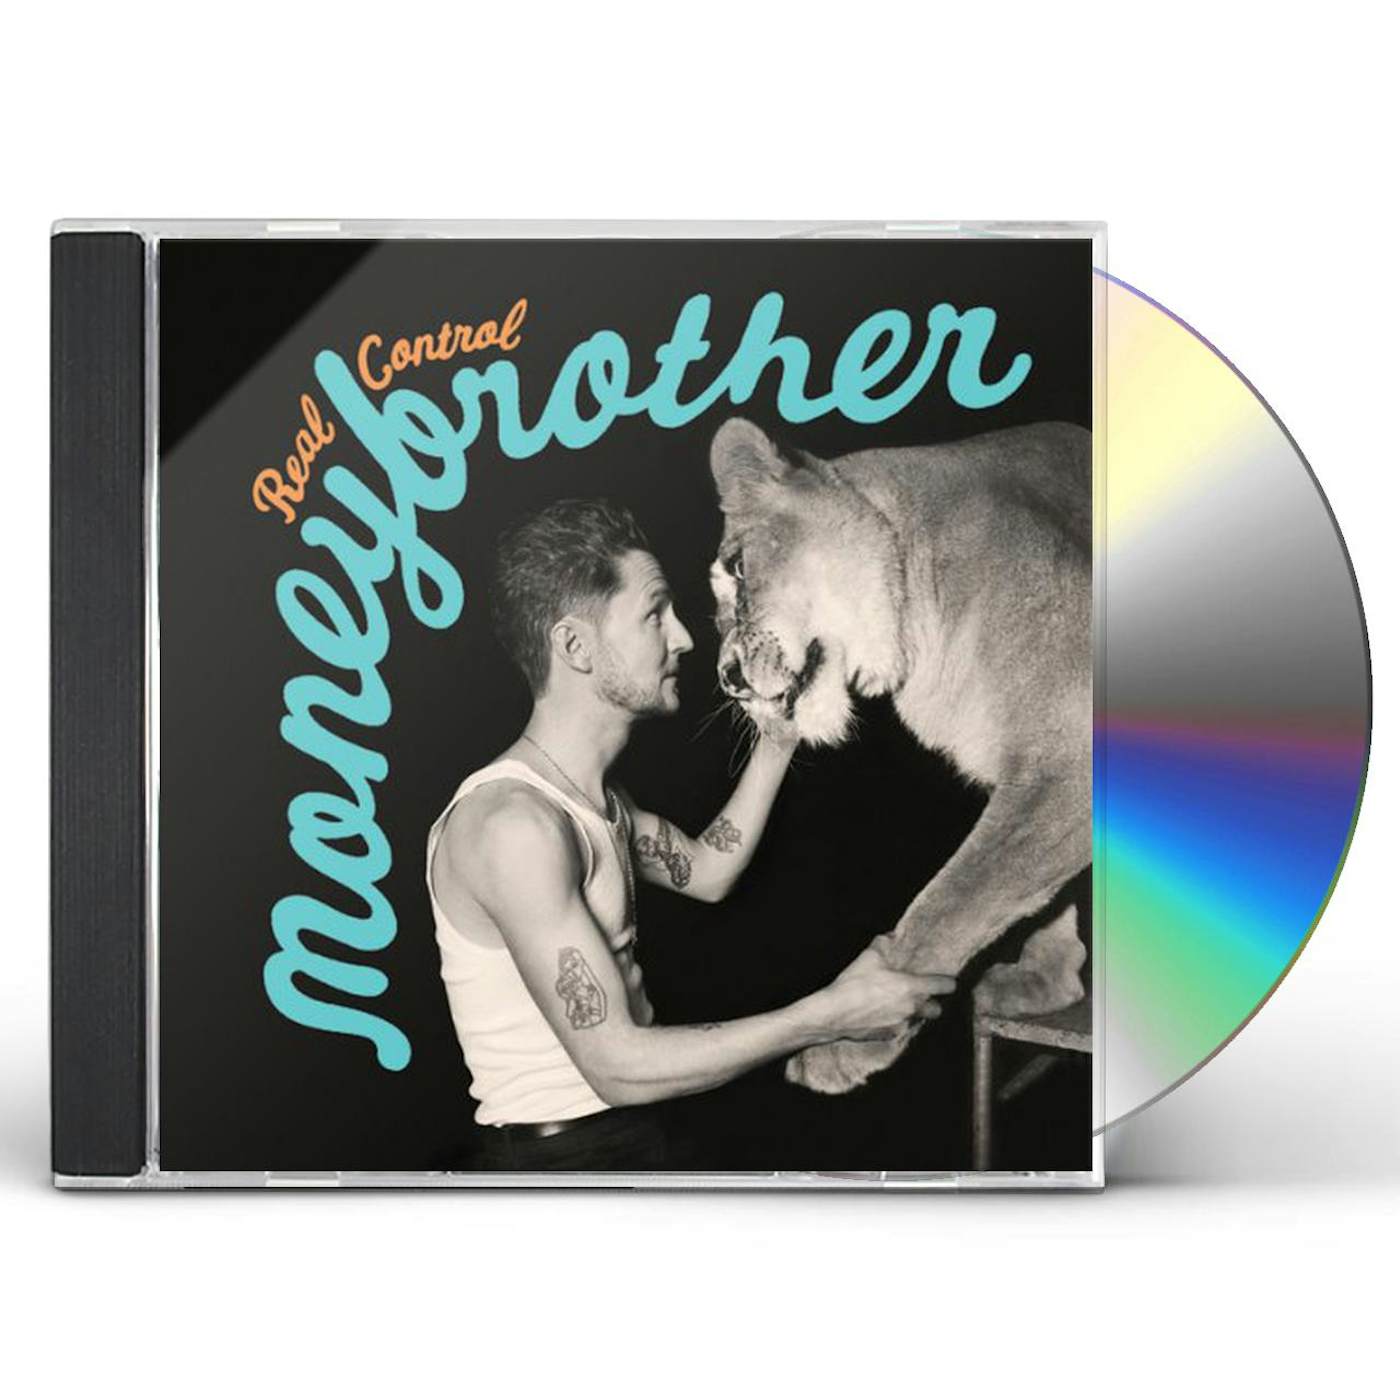 Moneybrother REAL CONTROL CD